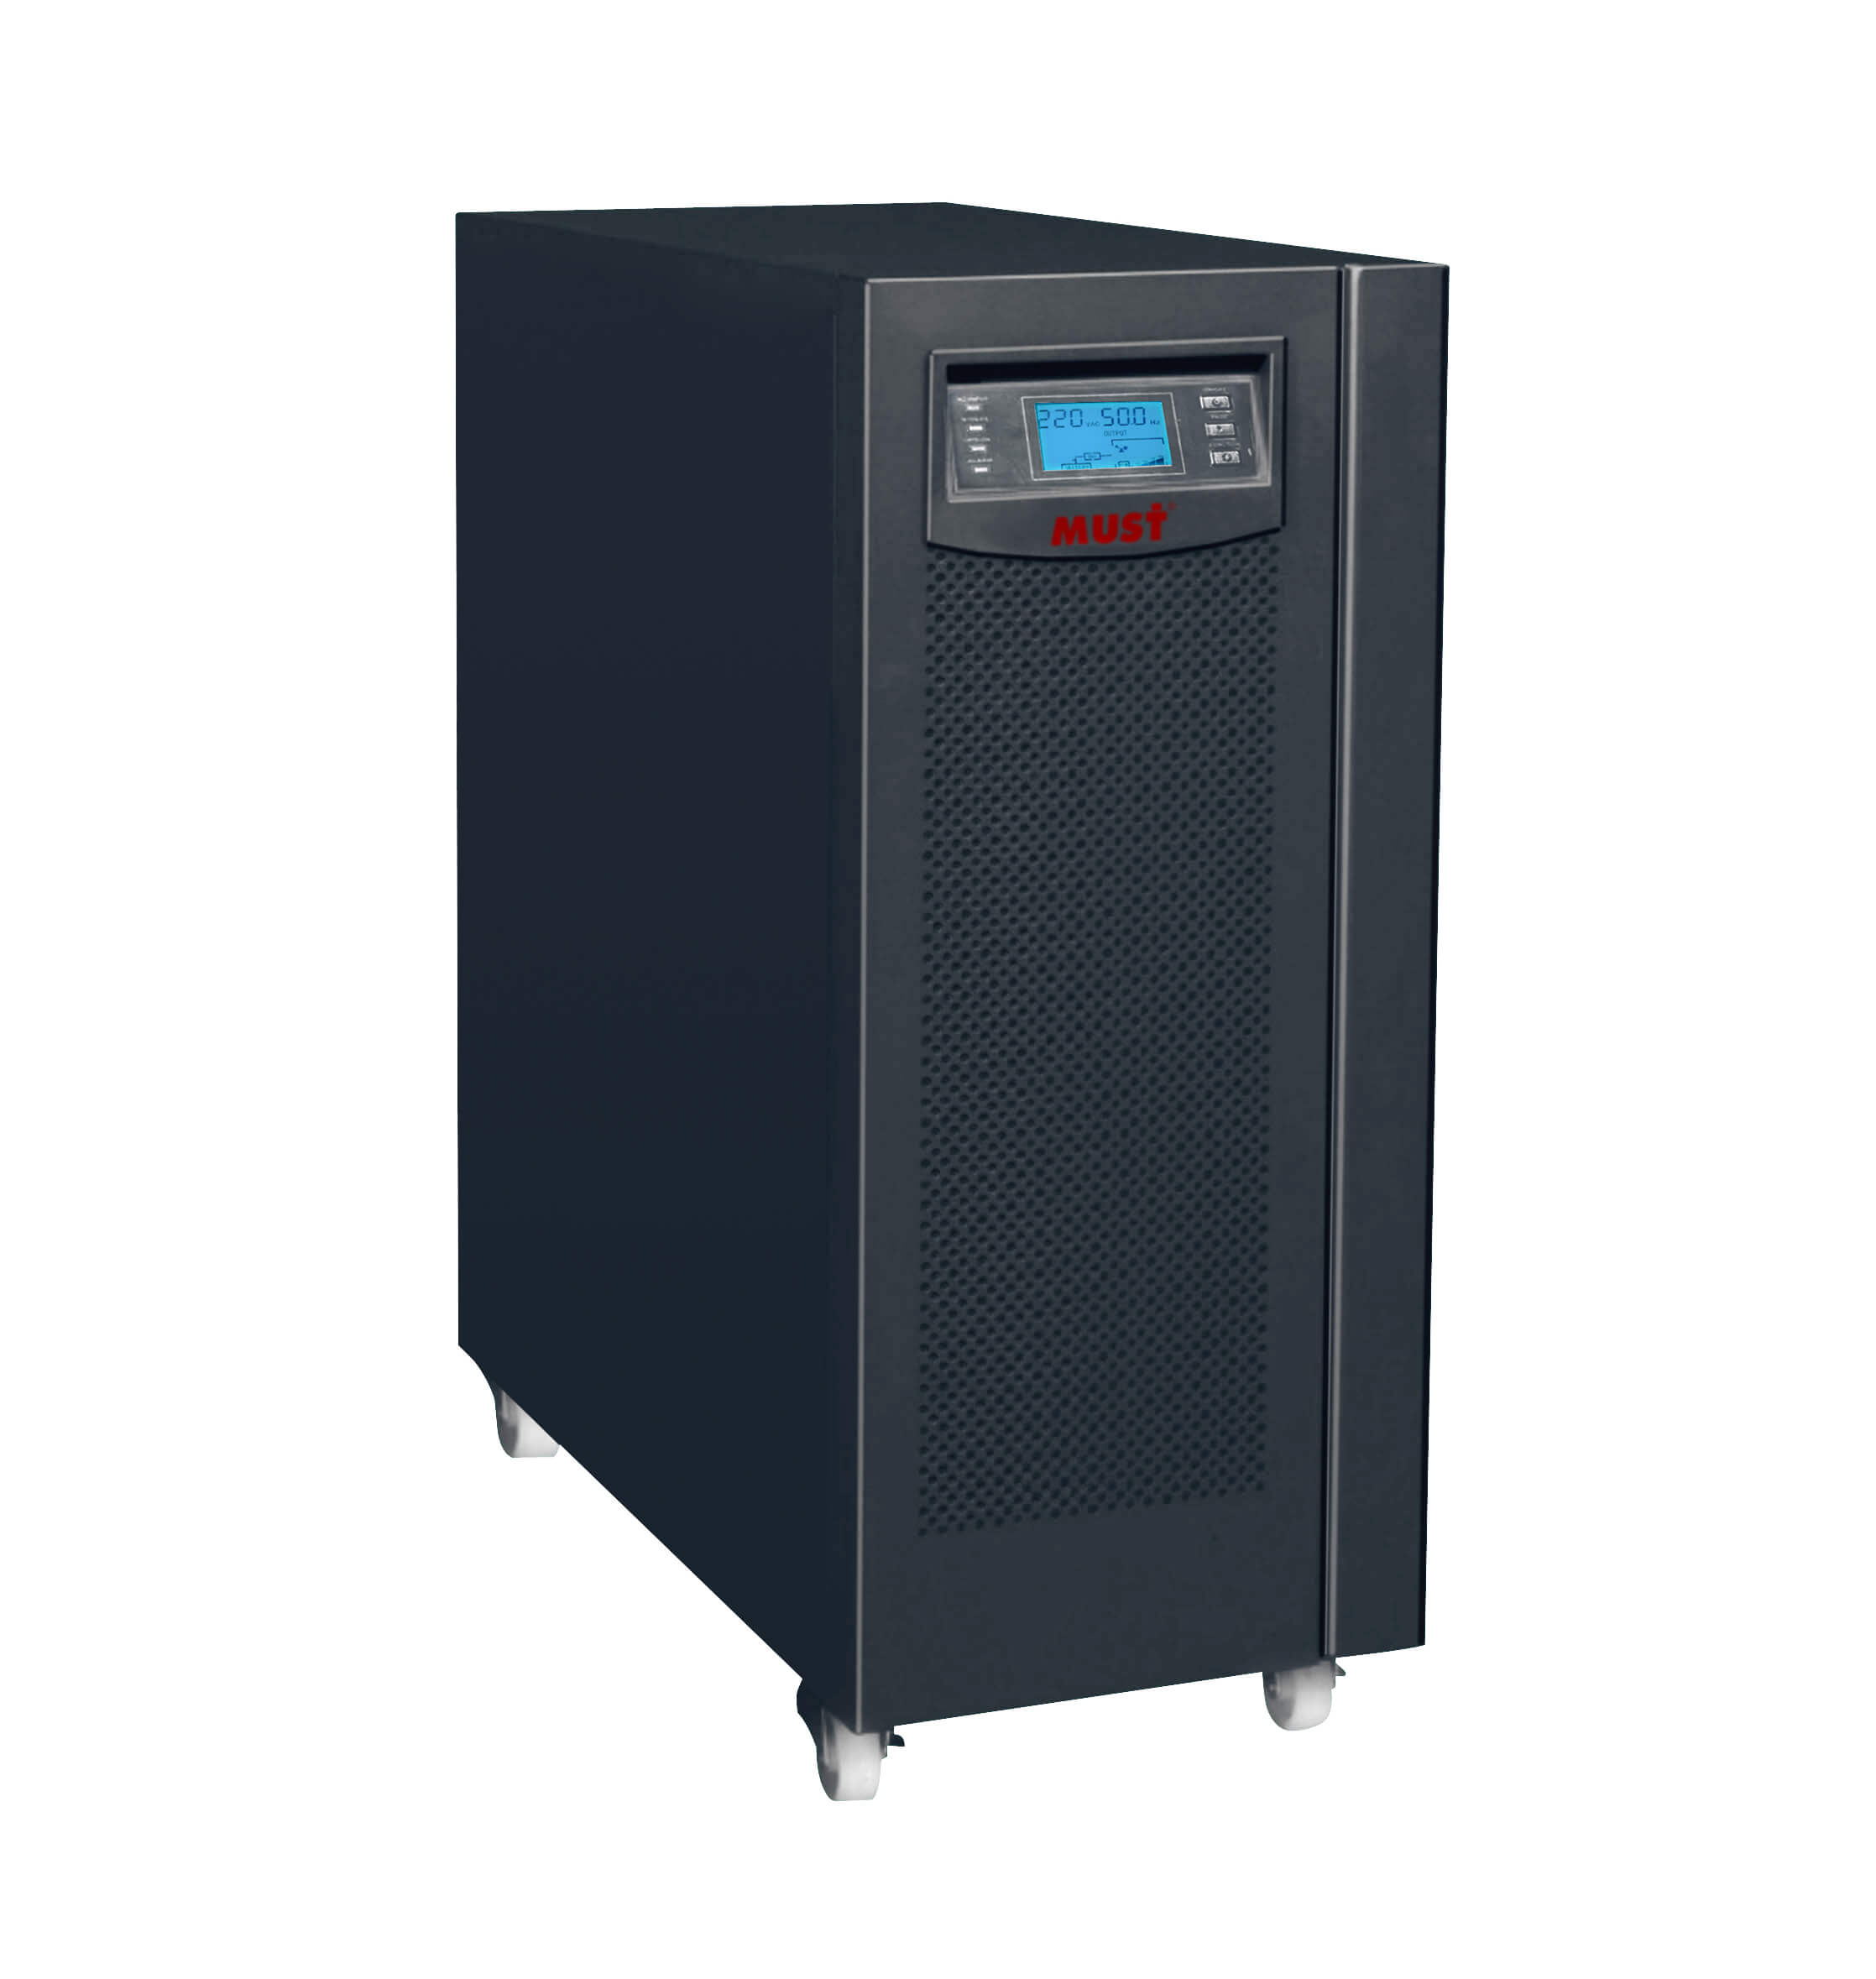 EH5000 Series High Frequency 3/1 Online UPS (10-20KVA)